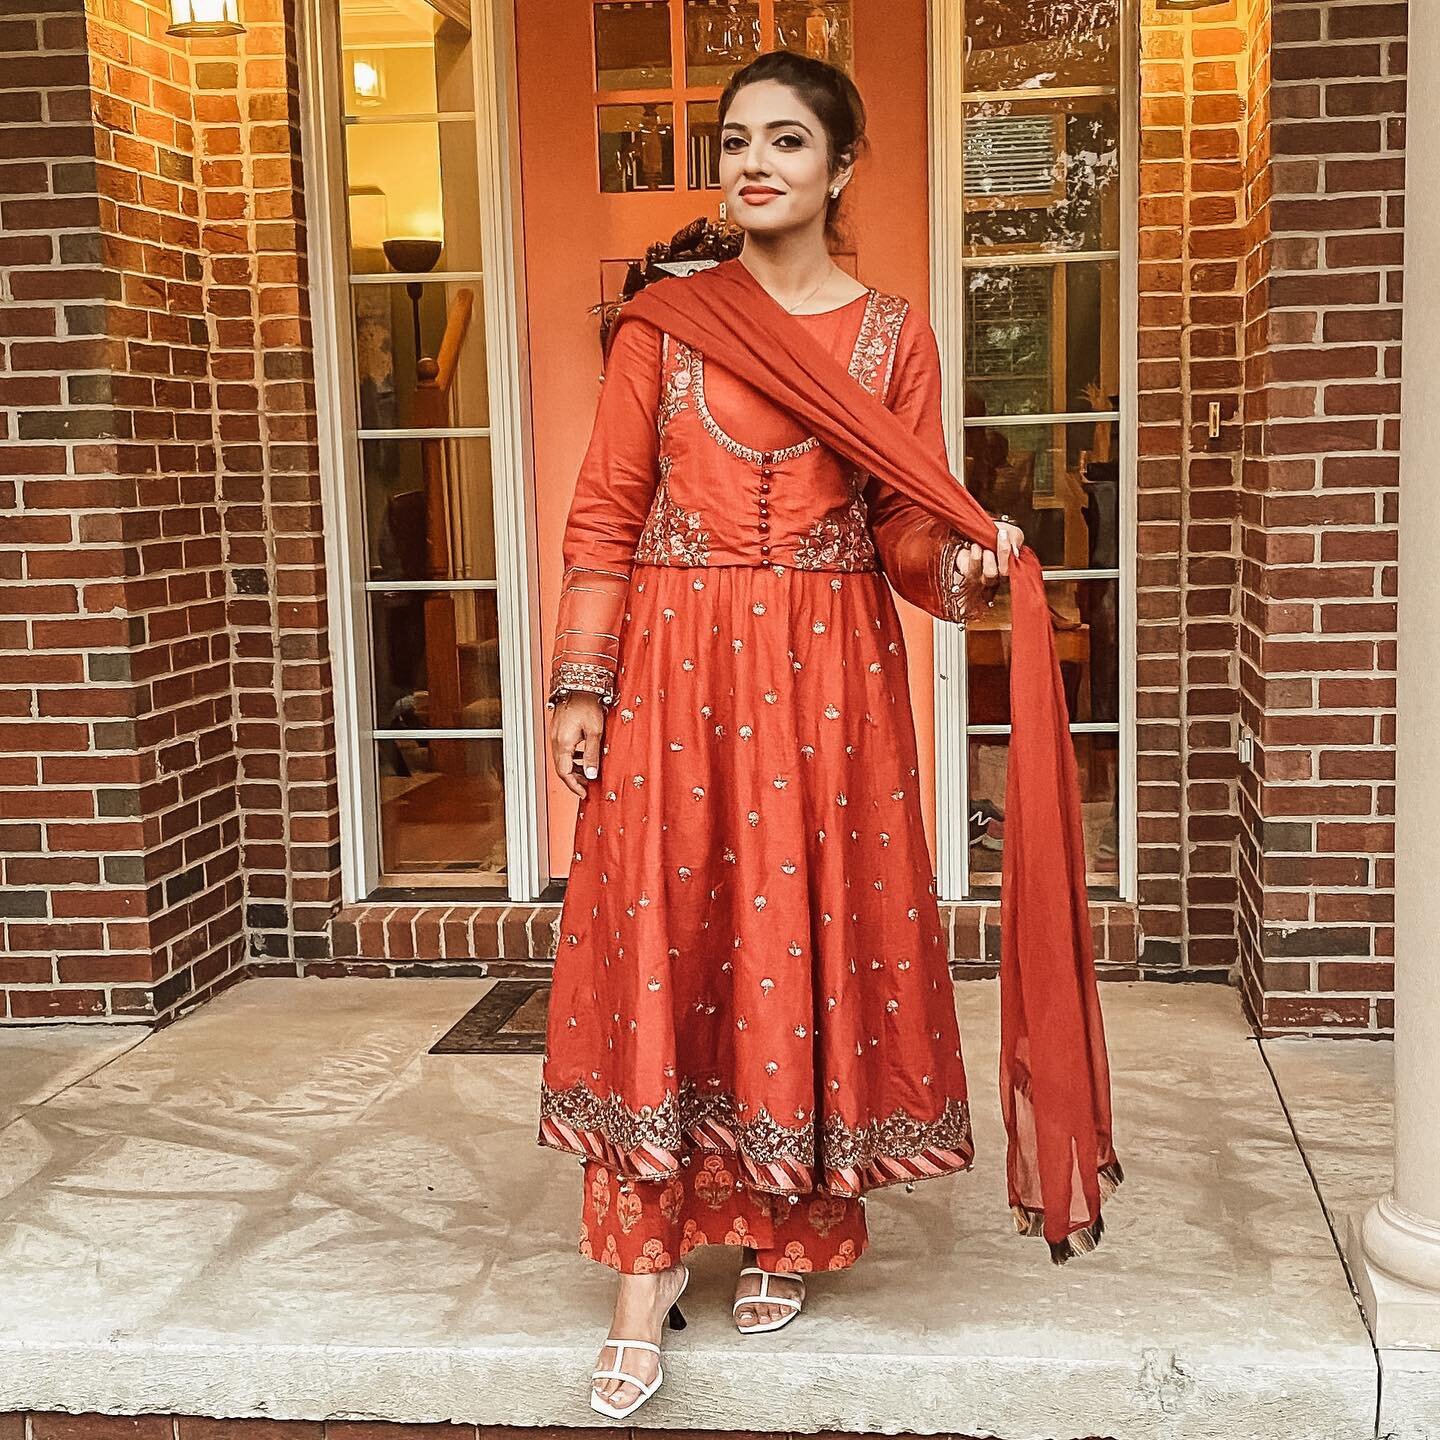 🎉 Celebrations 🎉
.
.
.
I&rsquo;m loving EVERY moment with my family after a long 18 months. This beautiful outfit was order from @mariabofficial and delivered to my house within one week from Pakistan via DHL. 
.
.
Have you ever ordered Pakistani s